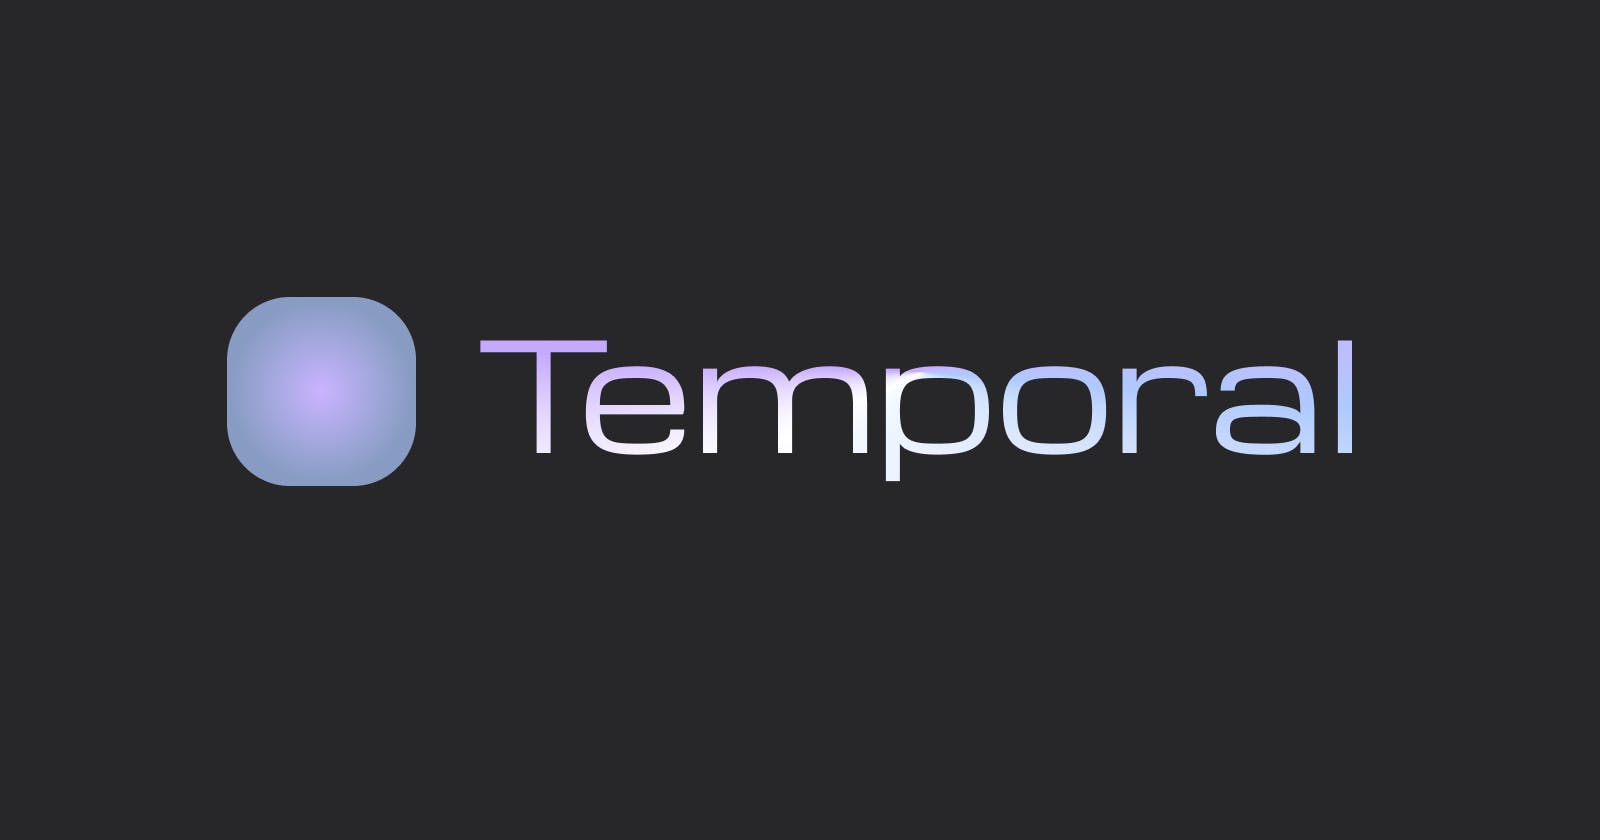 Temporal: Remember every useful thing you've read on the Web